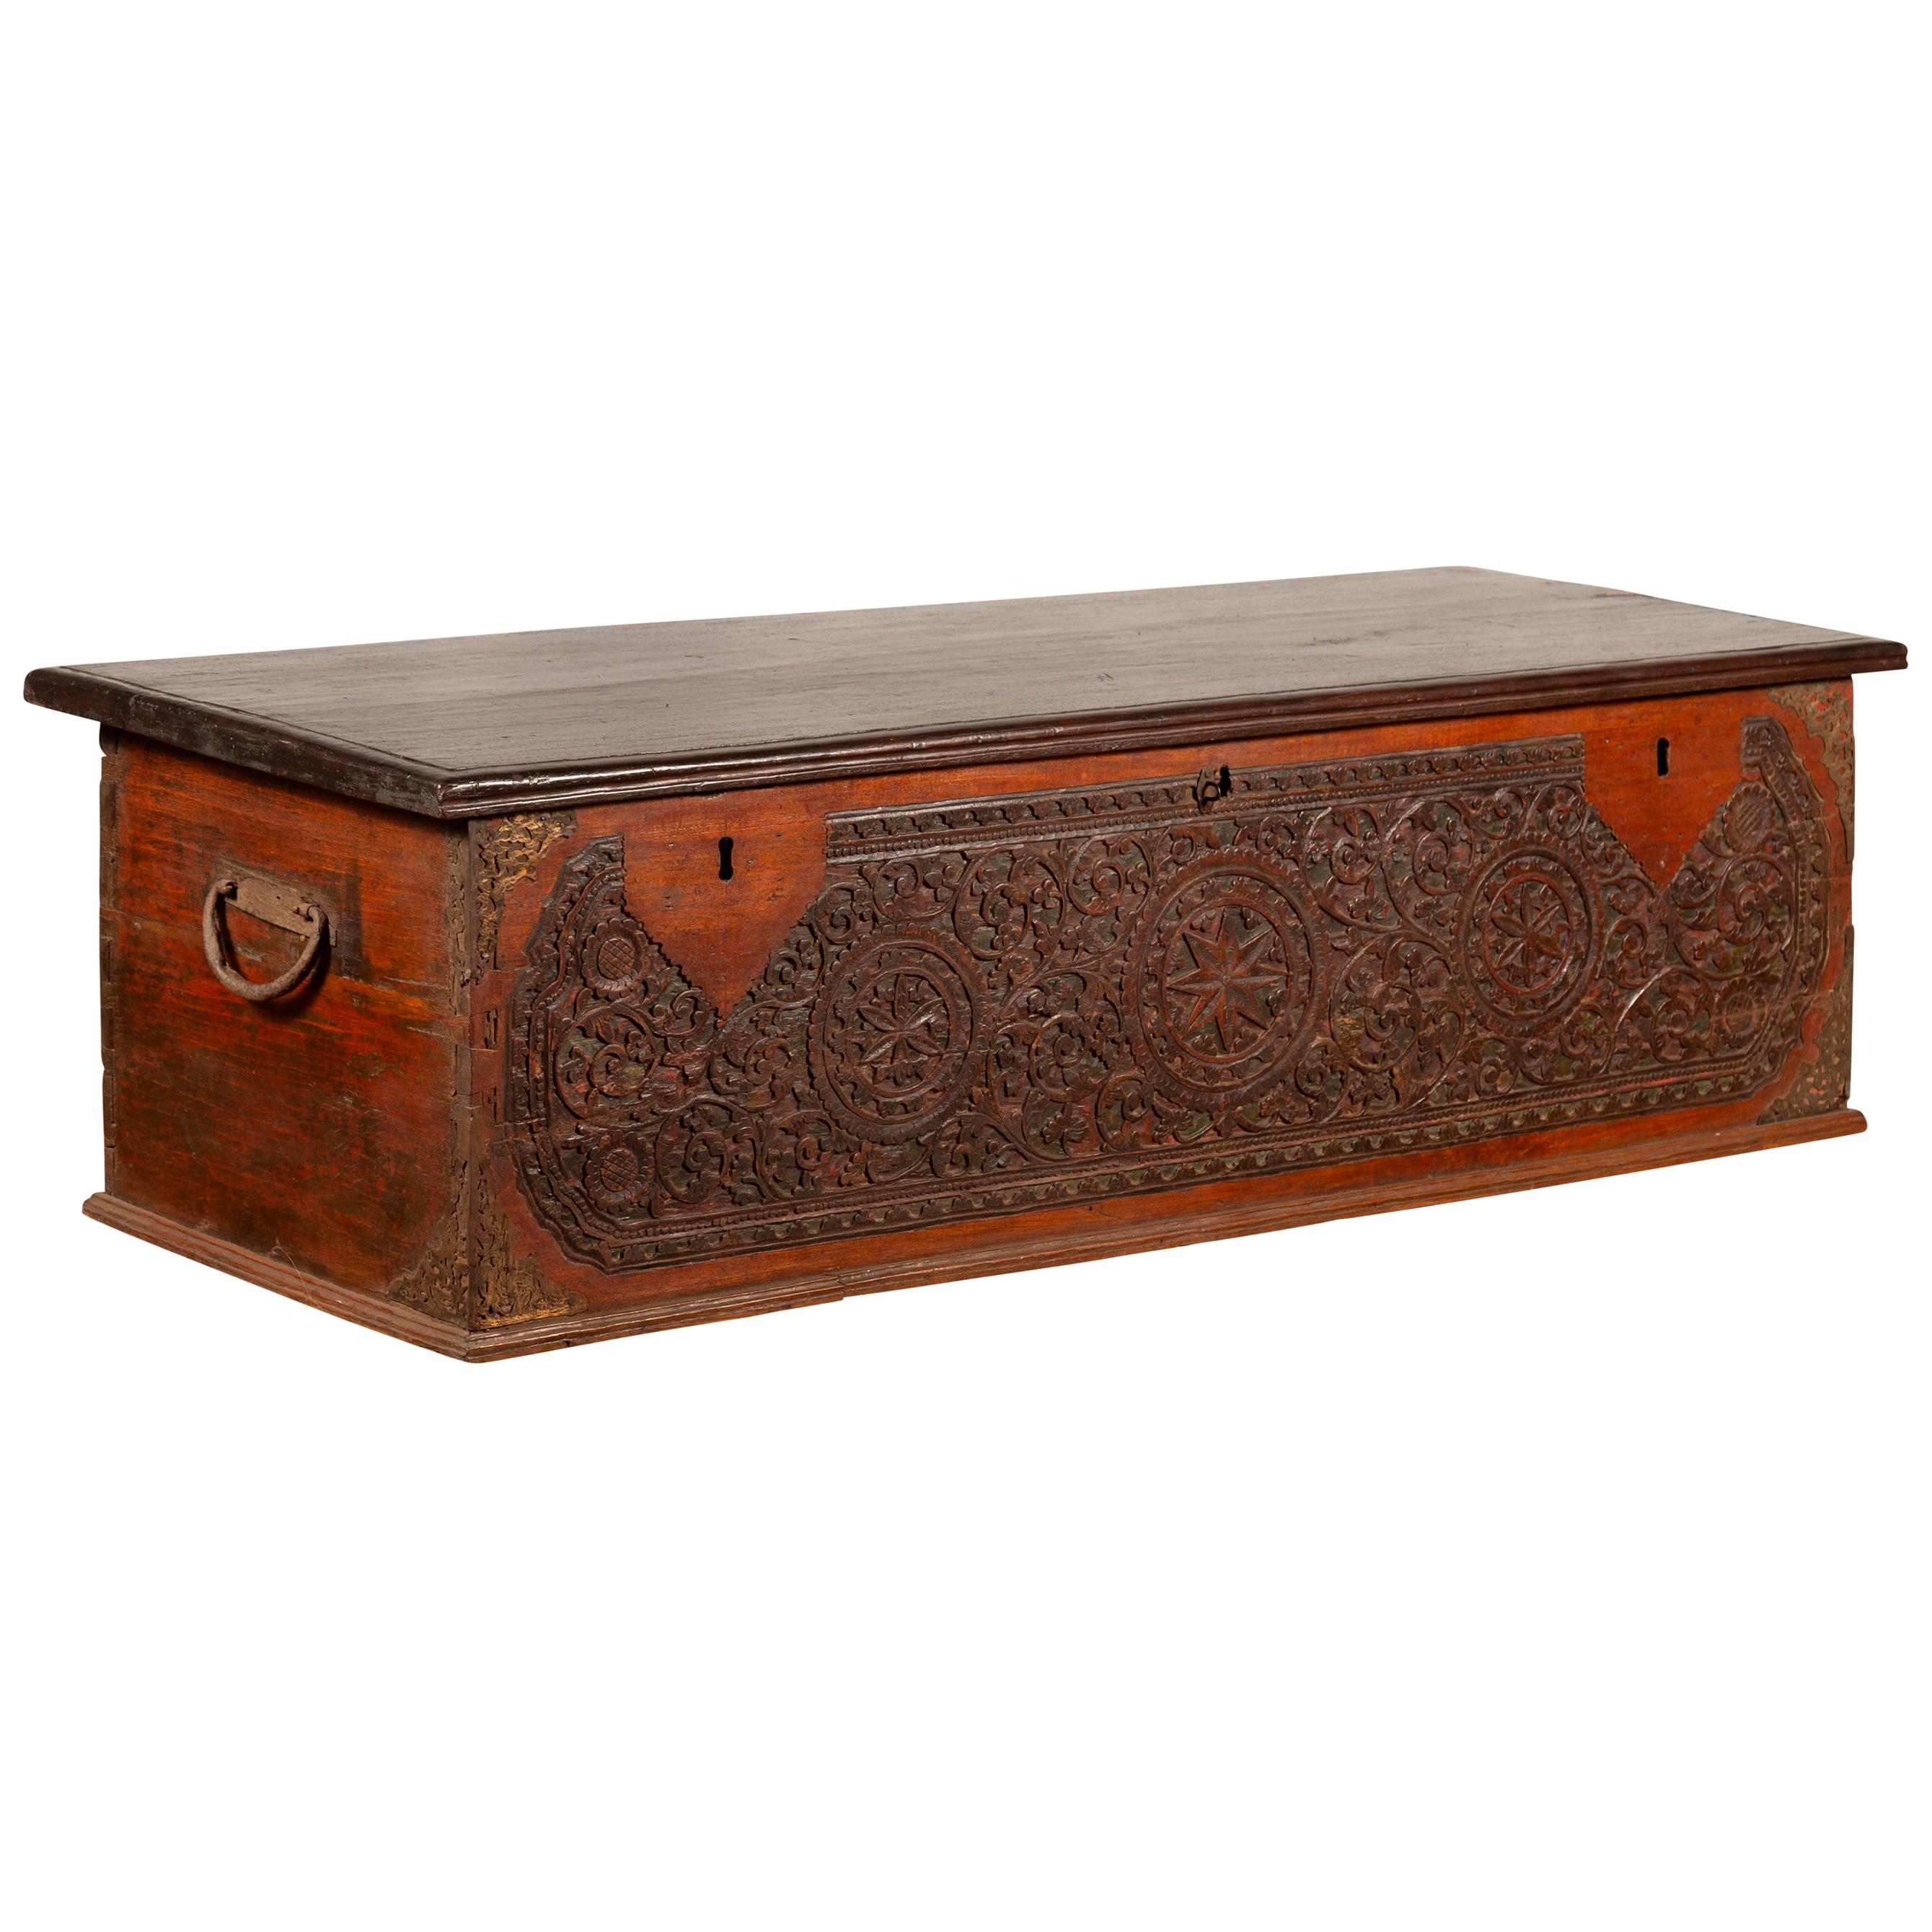 Late 19th Century Coffer from Sumatra with Carved Motifs and Iron Hardware For Sale